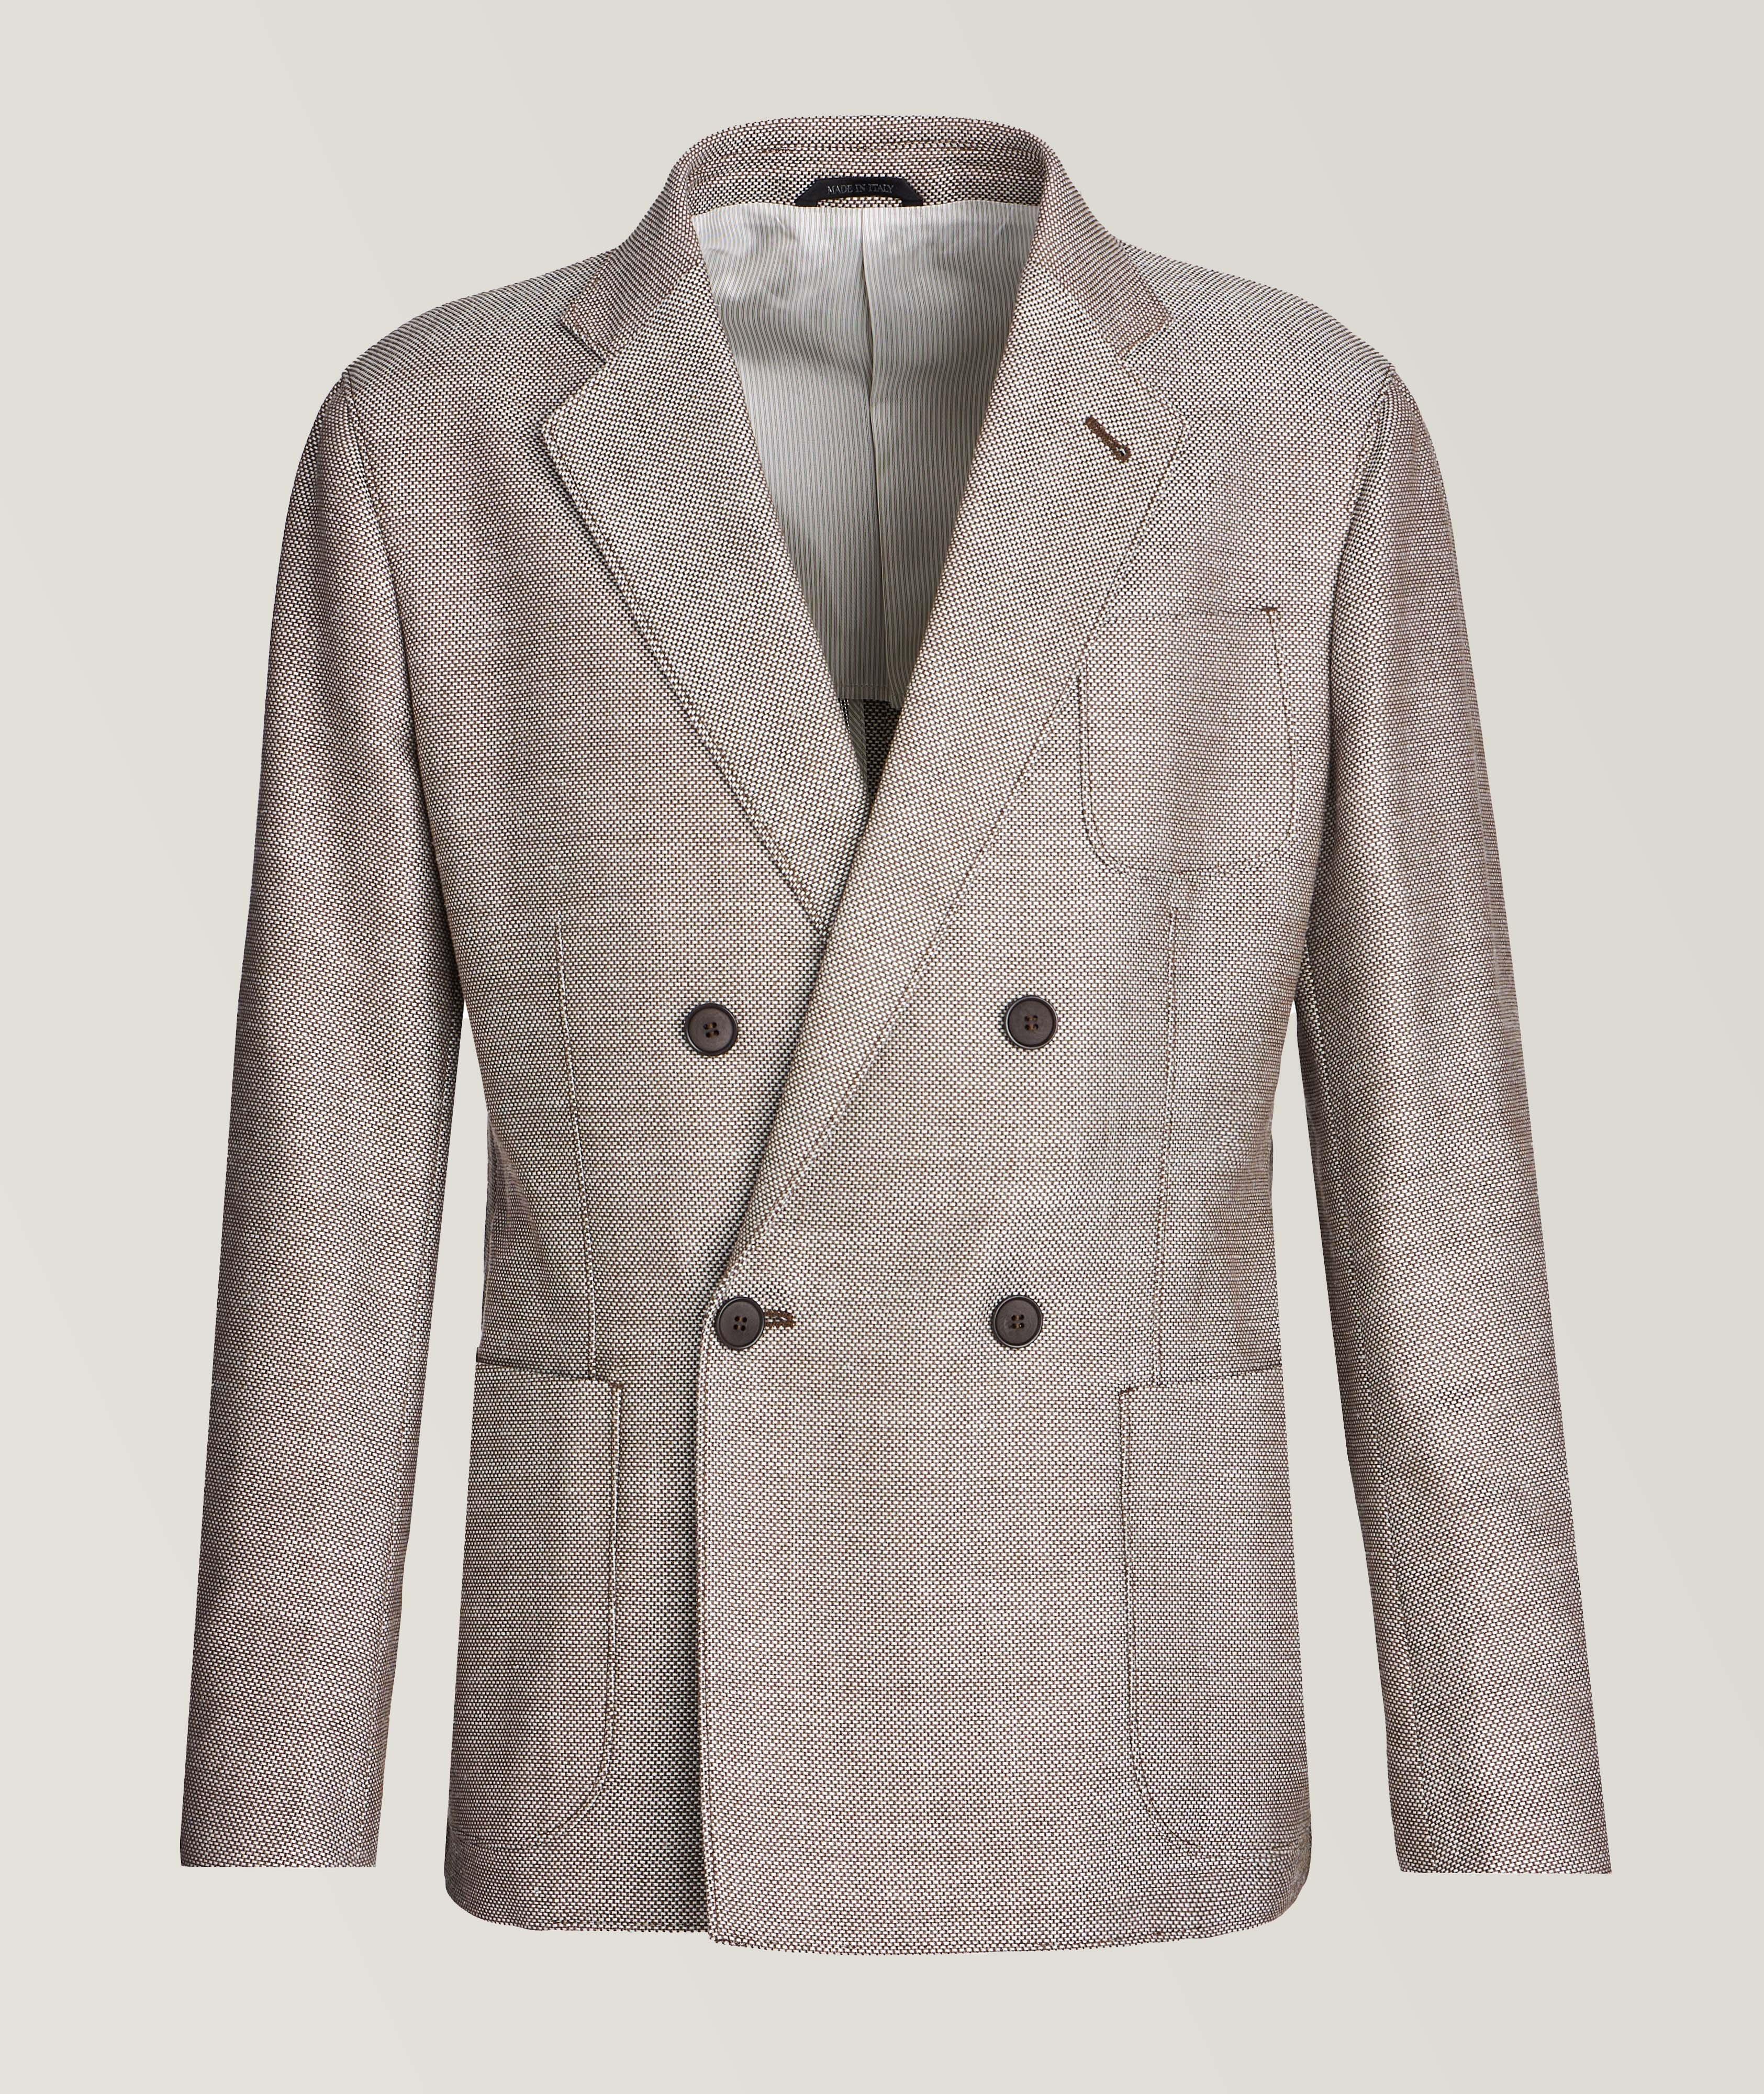 Upton Collection Jacquard Checkered Double-Breasted Wool-Blend Sport Jacket